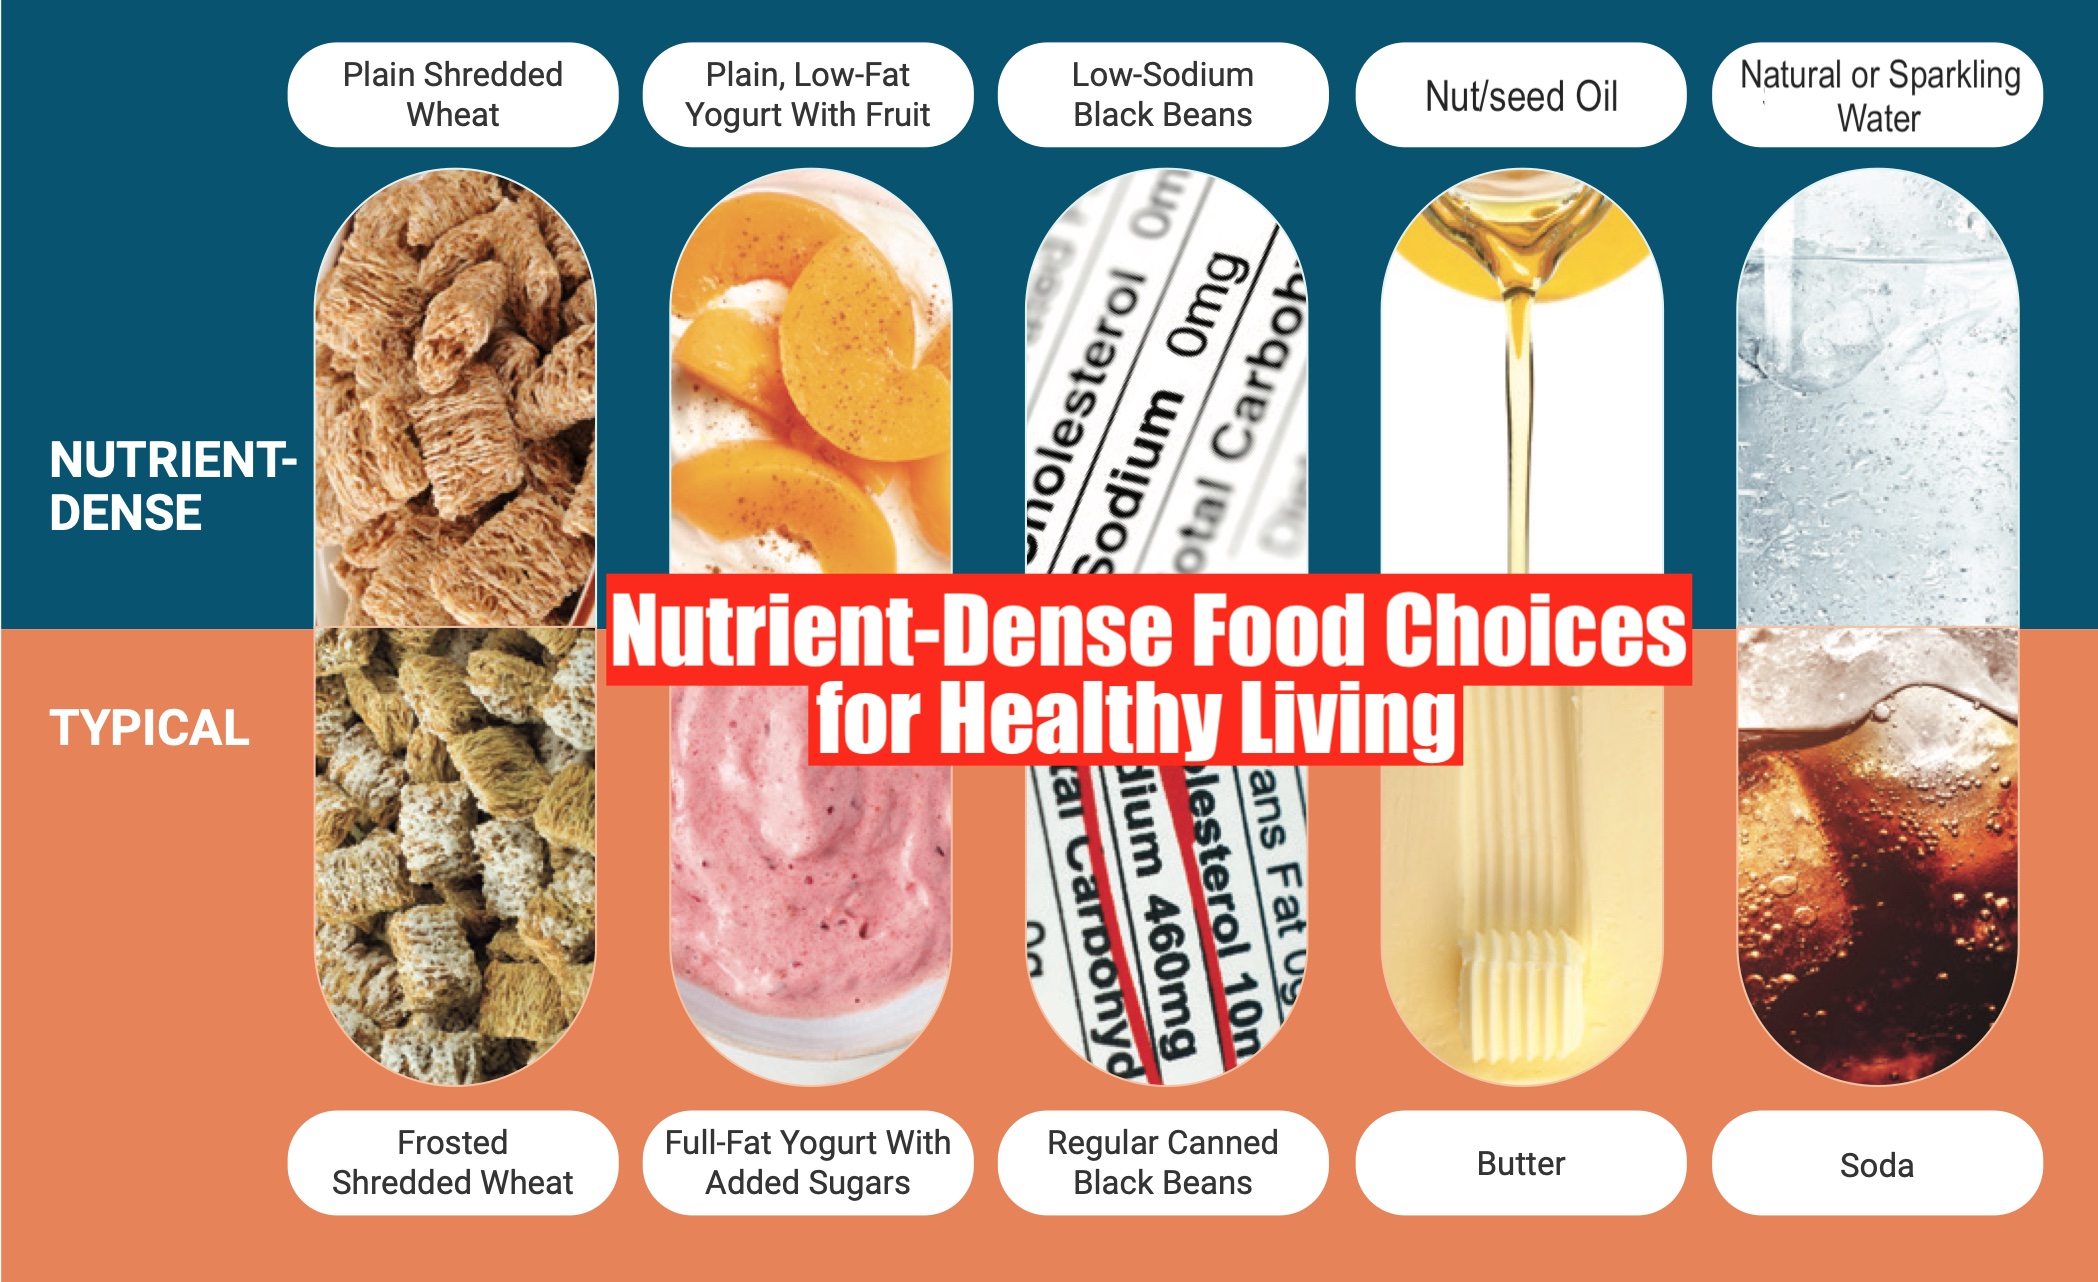 Making Nutrient-Dense Food Choices for Healthy Living